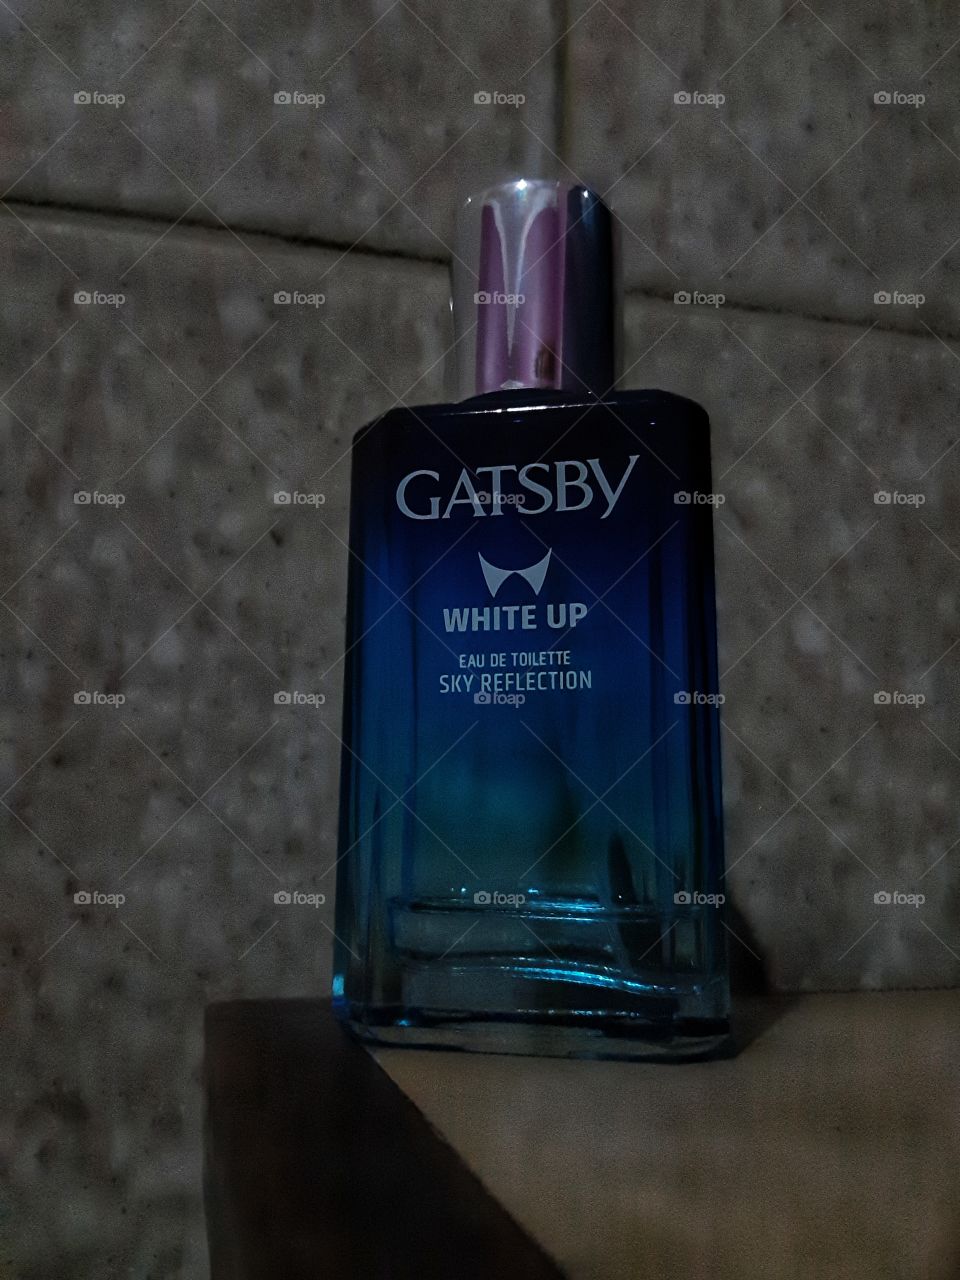 a blue perfume bottle placed on the corner of the table and shot from the bottom angle.